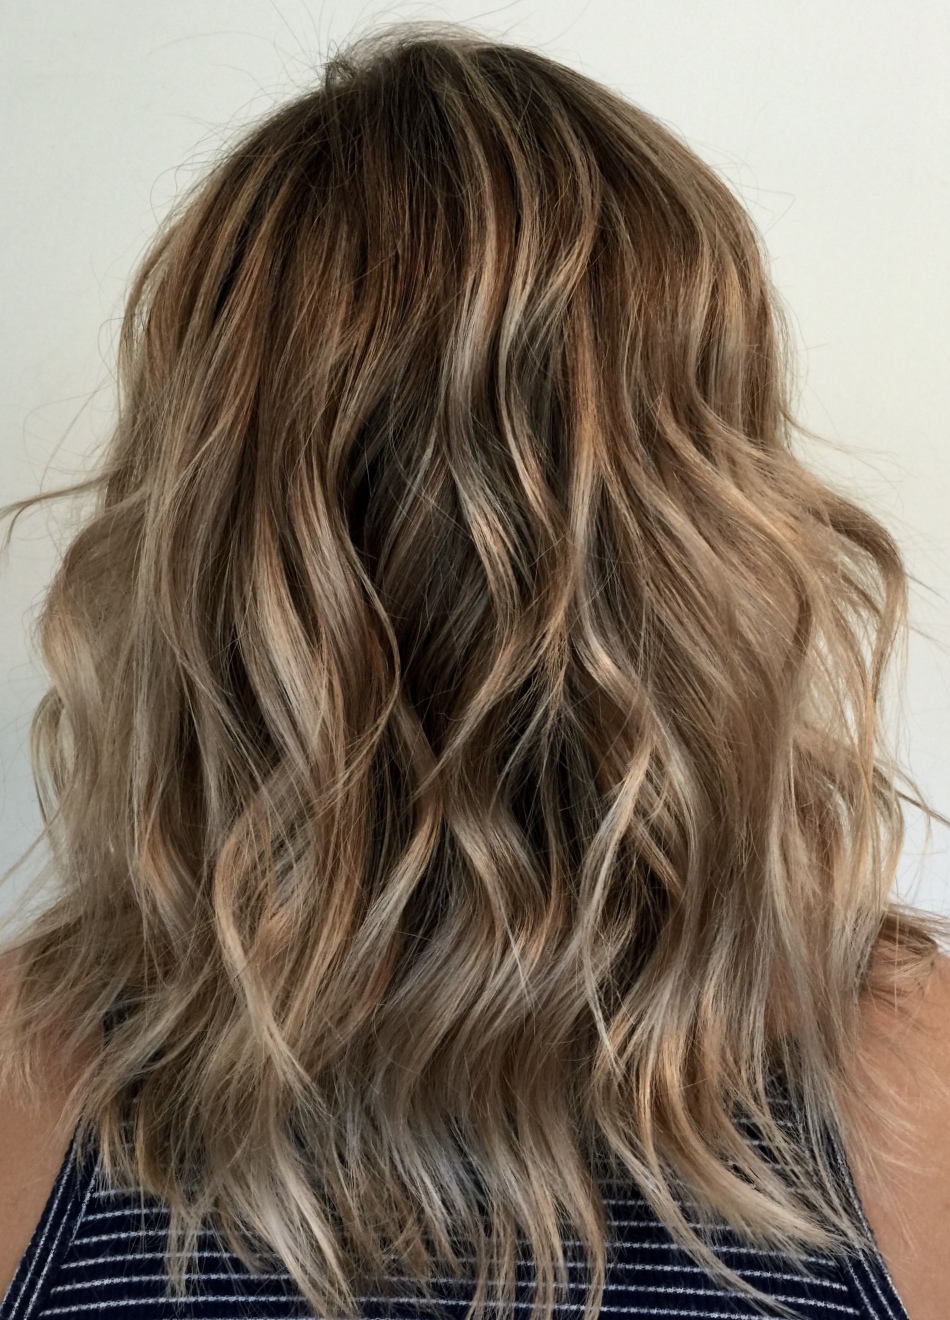 125 Top Rated Dirty blonde hair color thoughts This Year - Human Hair Exim